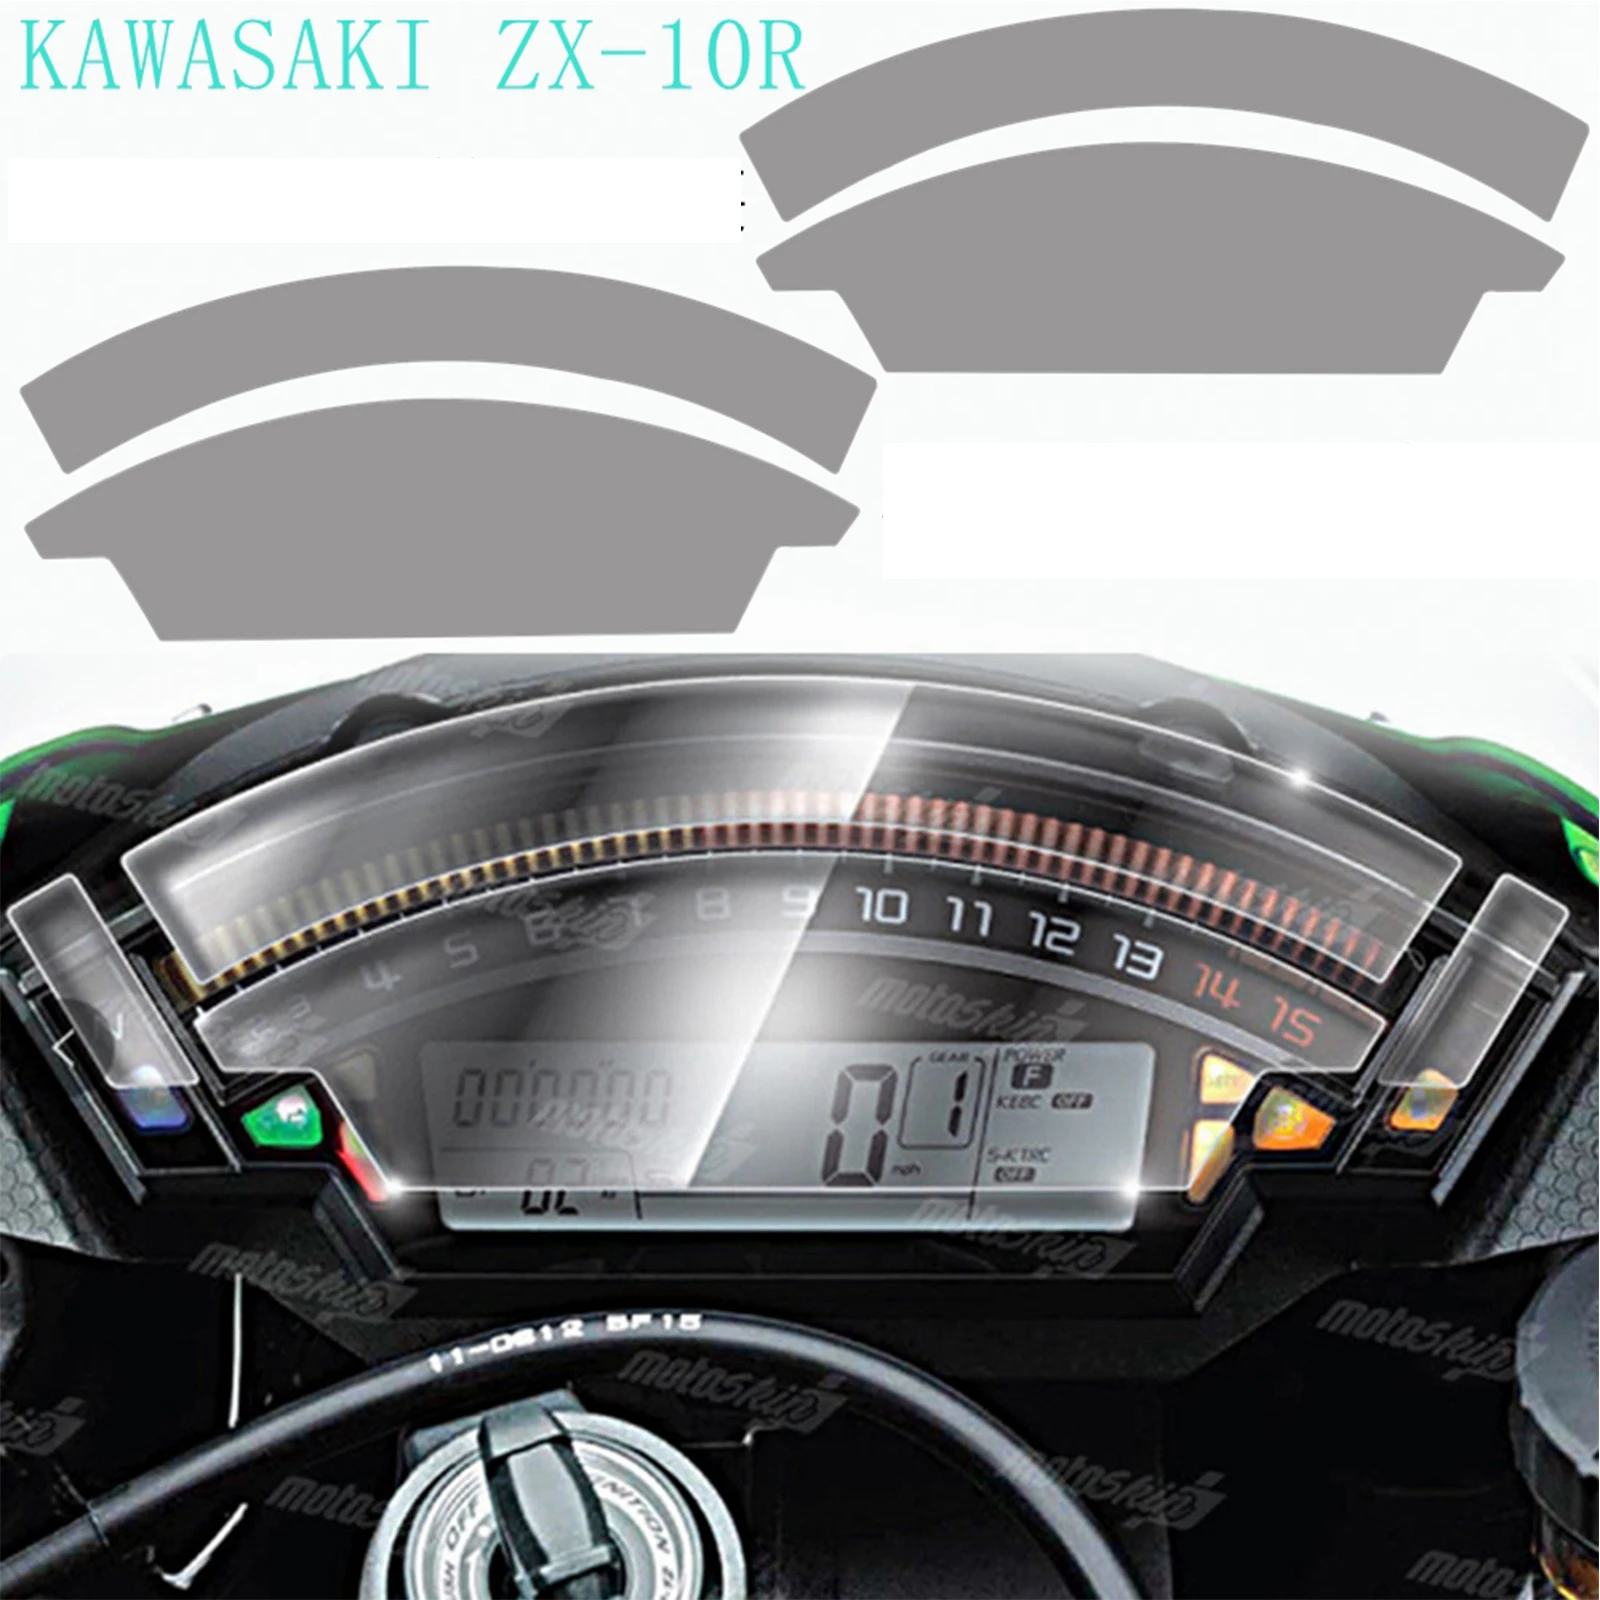 

2pcs Motorcycle Dashboard Cluster Scratch Speedometer Film Screen Protector Decal Sticker for Kawasaki ZX10R ZX 10R 2010-2016